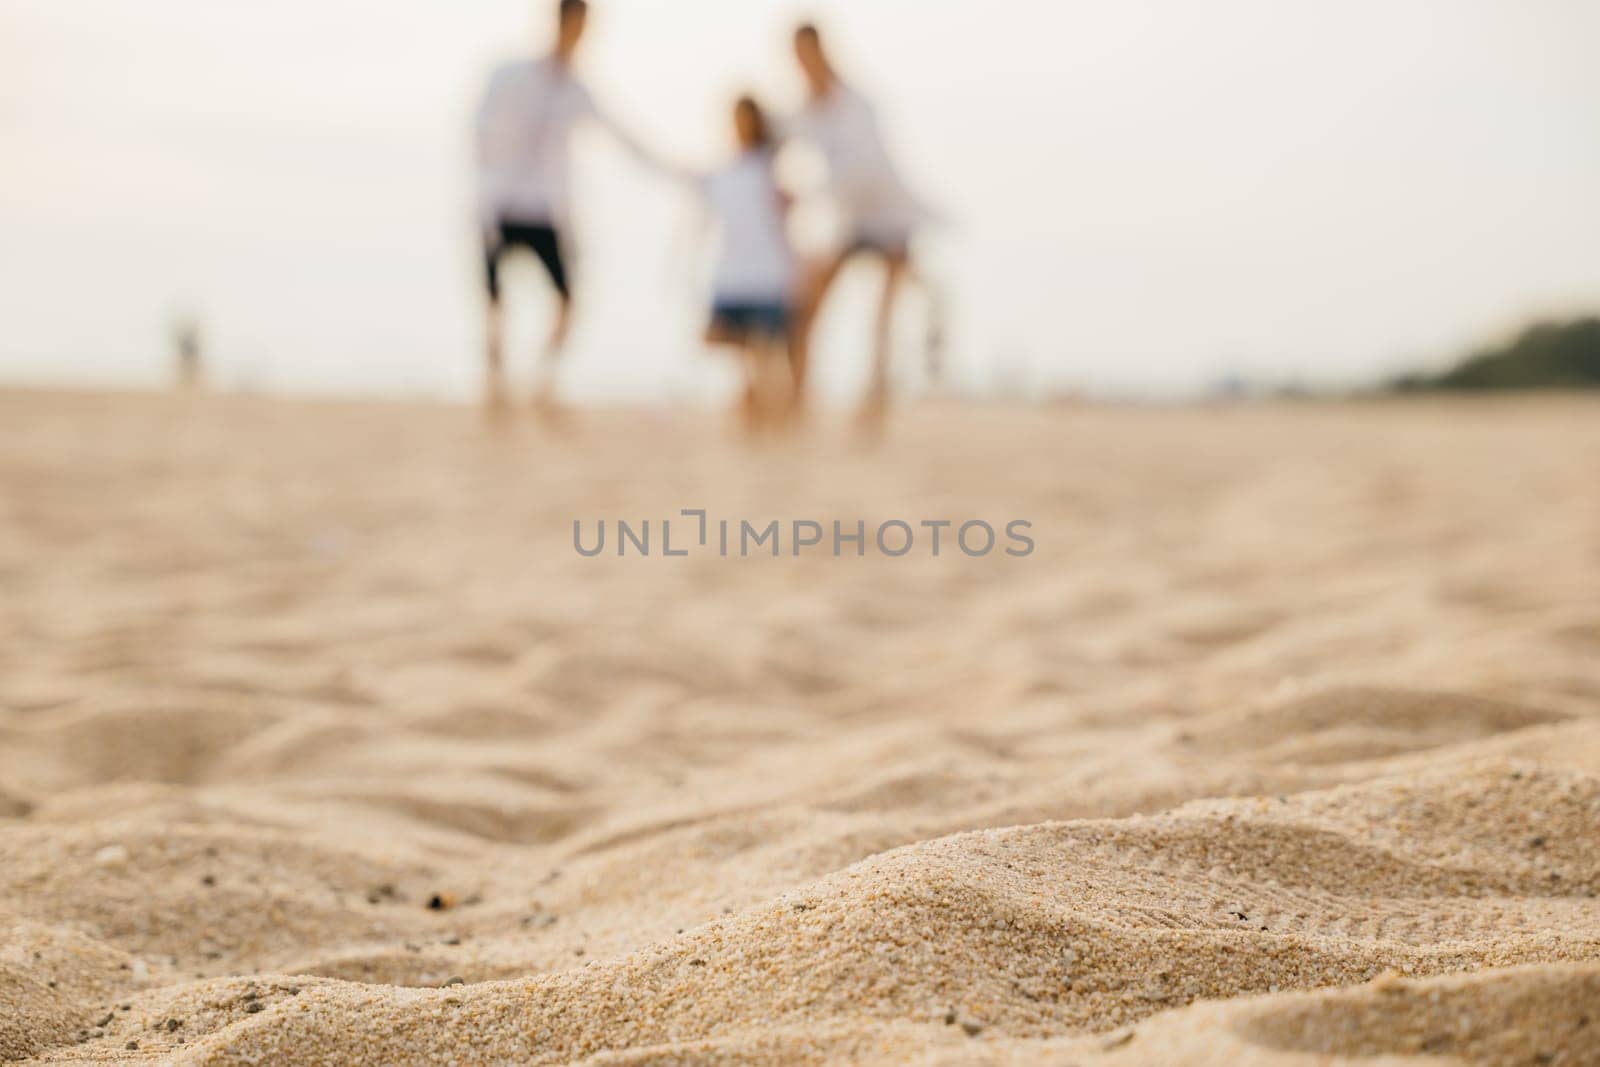 Running on the beach a joyful family with happy parents and children. Laughter play and joy during their summer holiday. Carefree moments of family bonding and happiness. Family on beach vacation by Sorapop